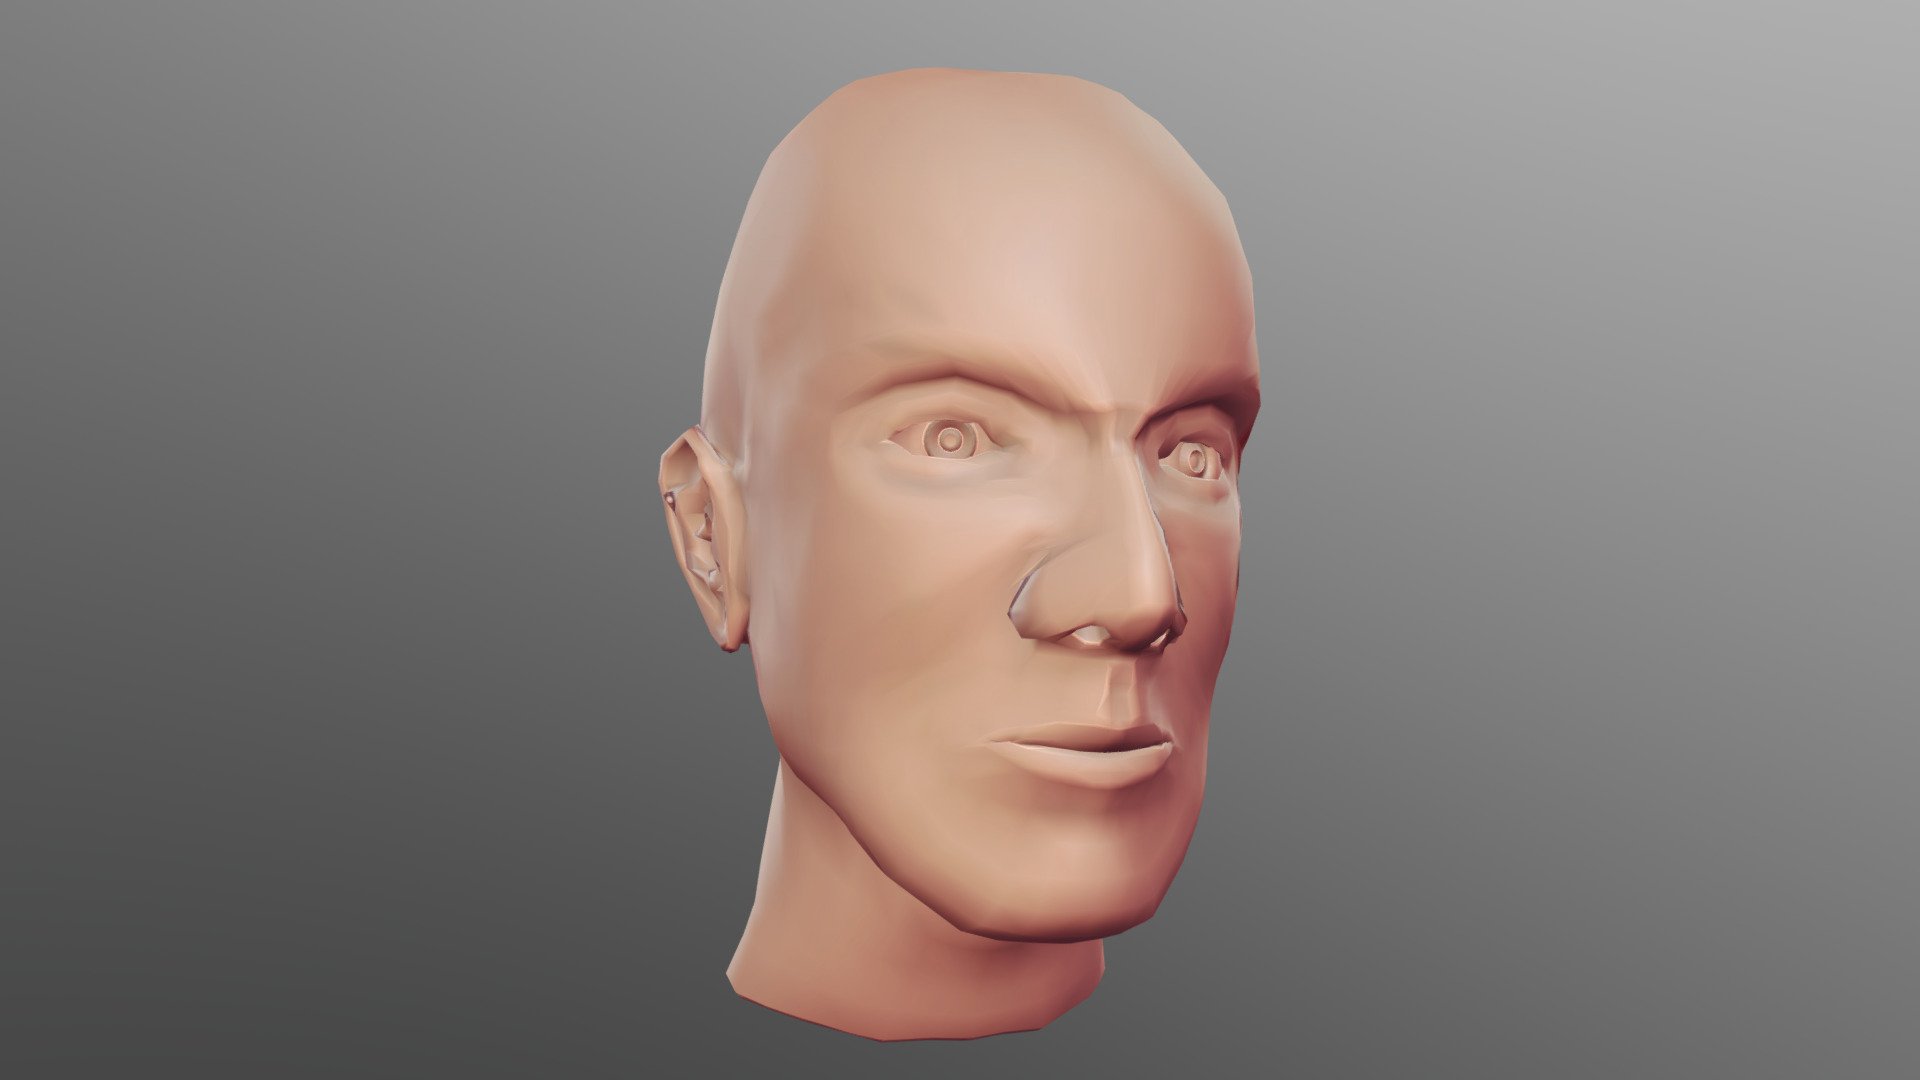 Male Low Poly Head Model By Me